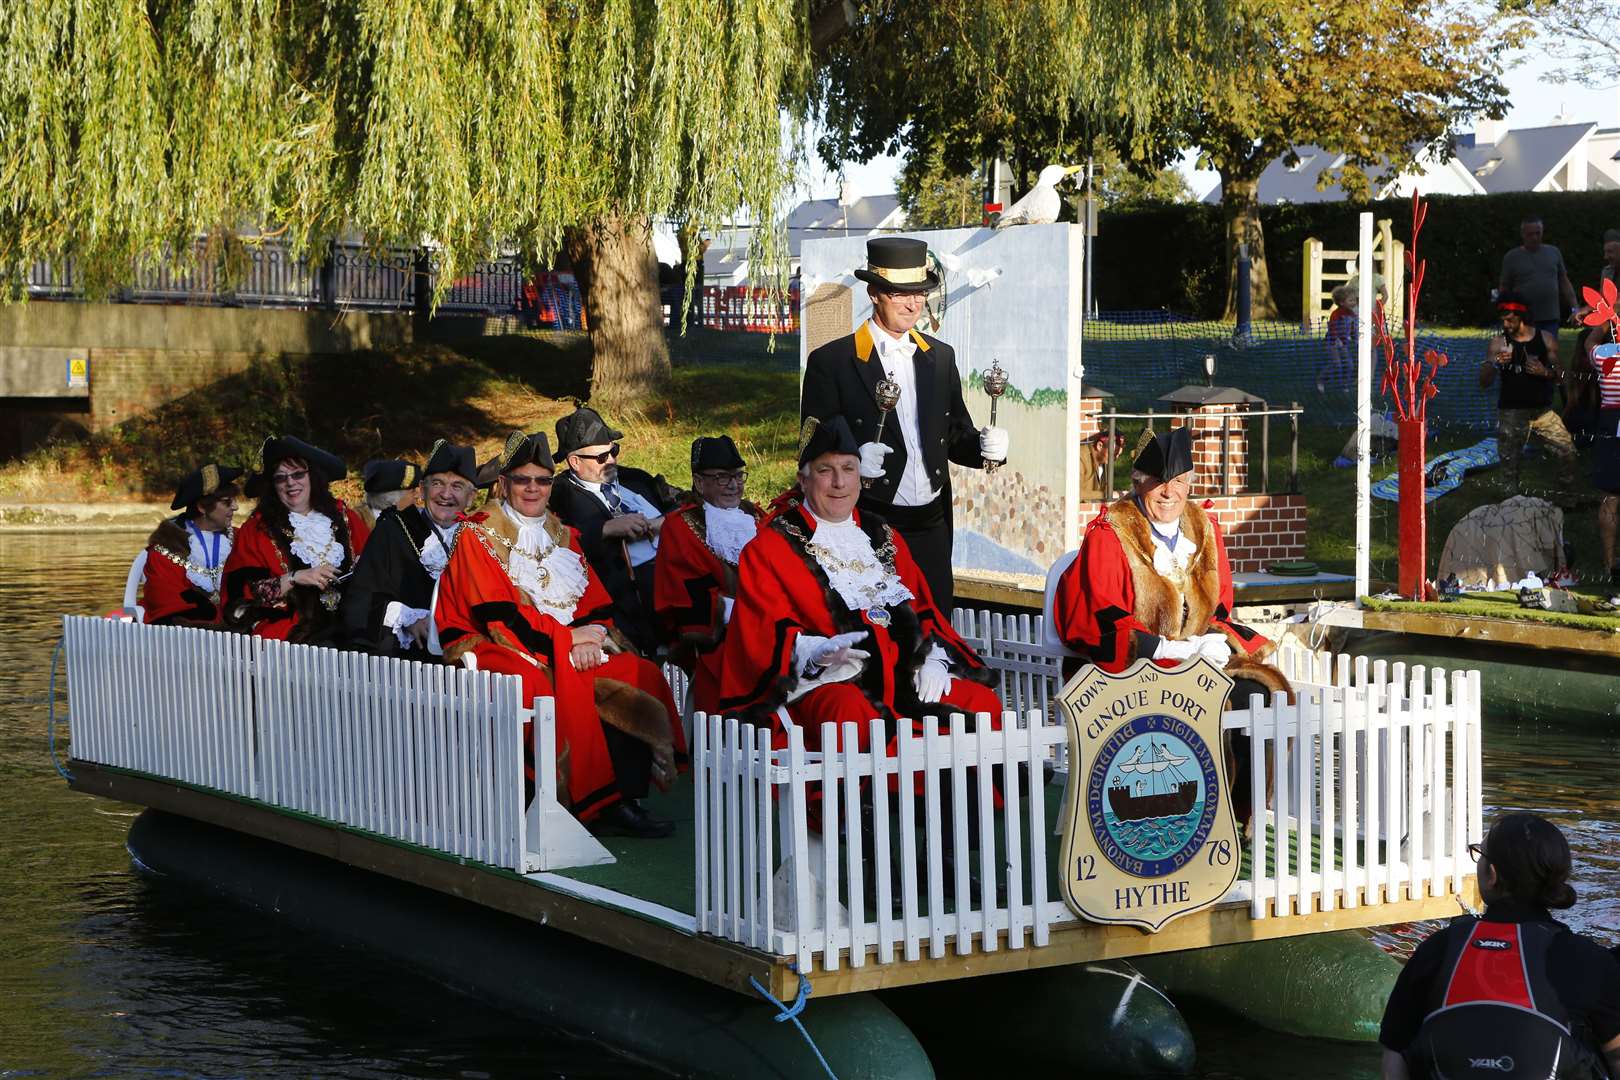 The Mayor of Hythe arrived on a float with the mayors of the other Cique Ports.Picture: Andy Jones